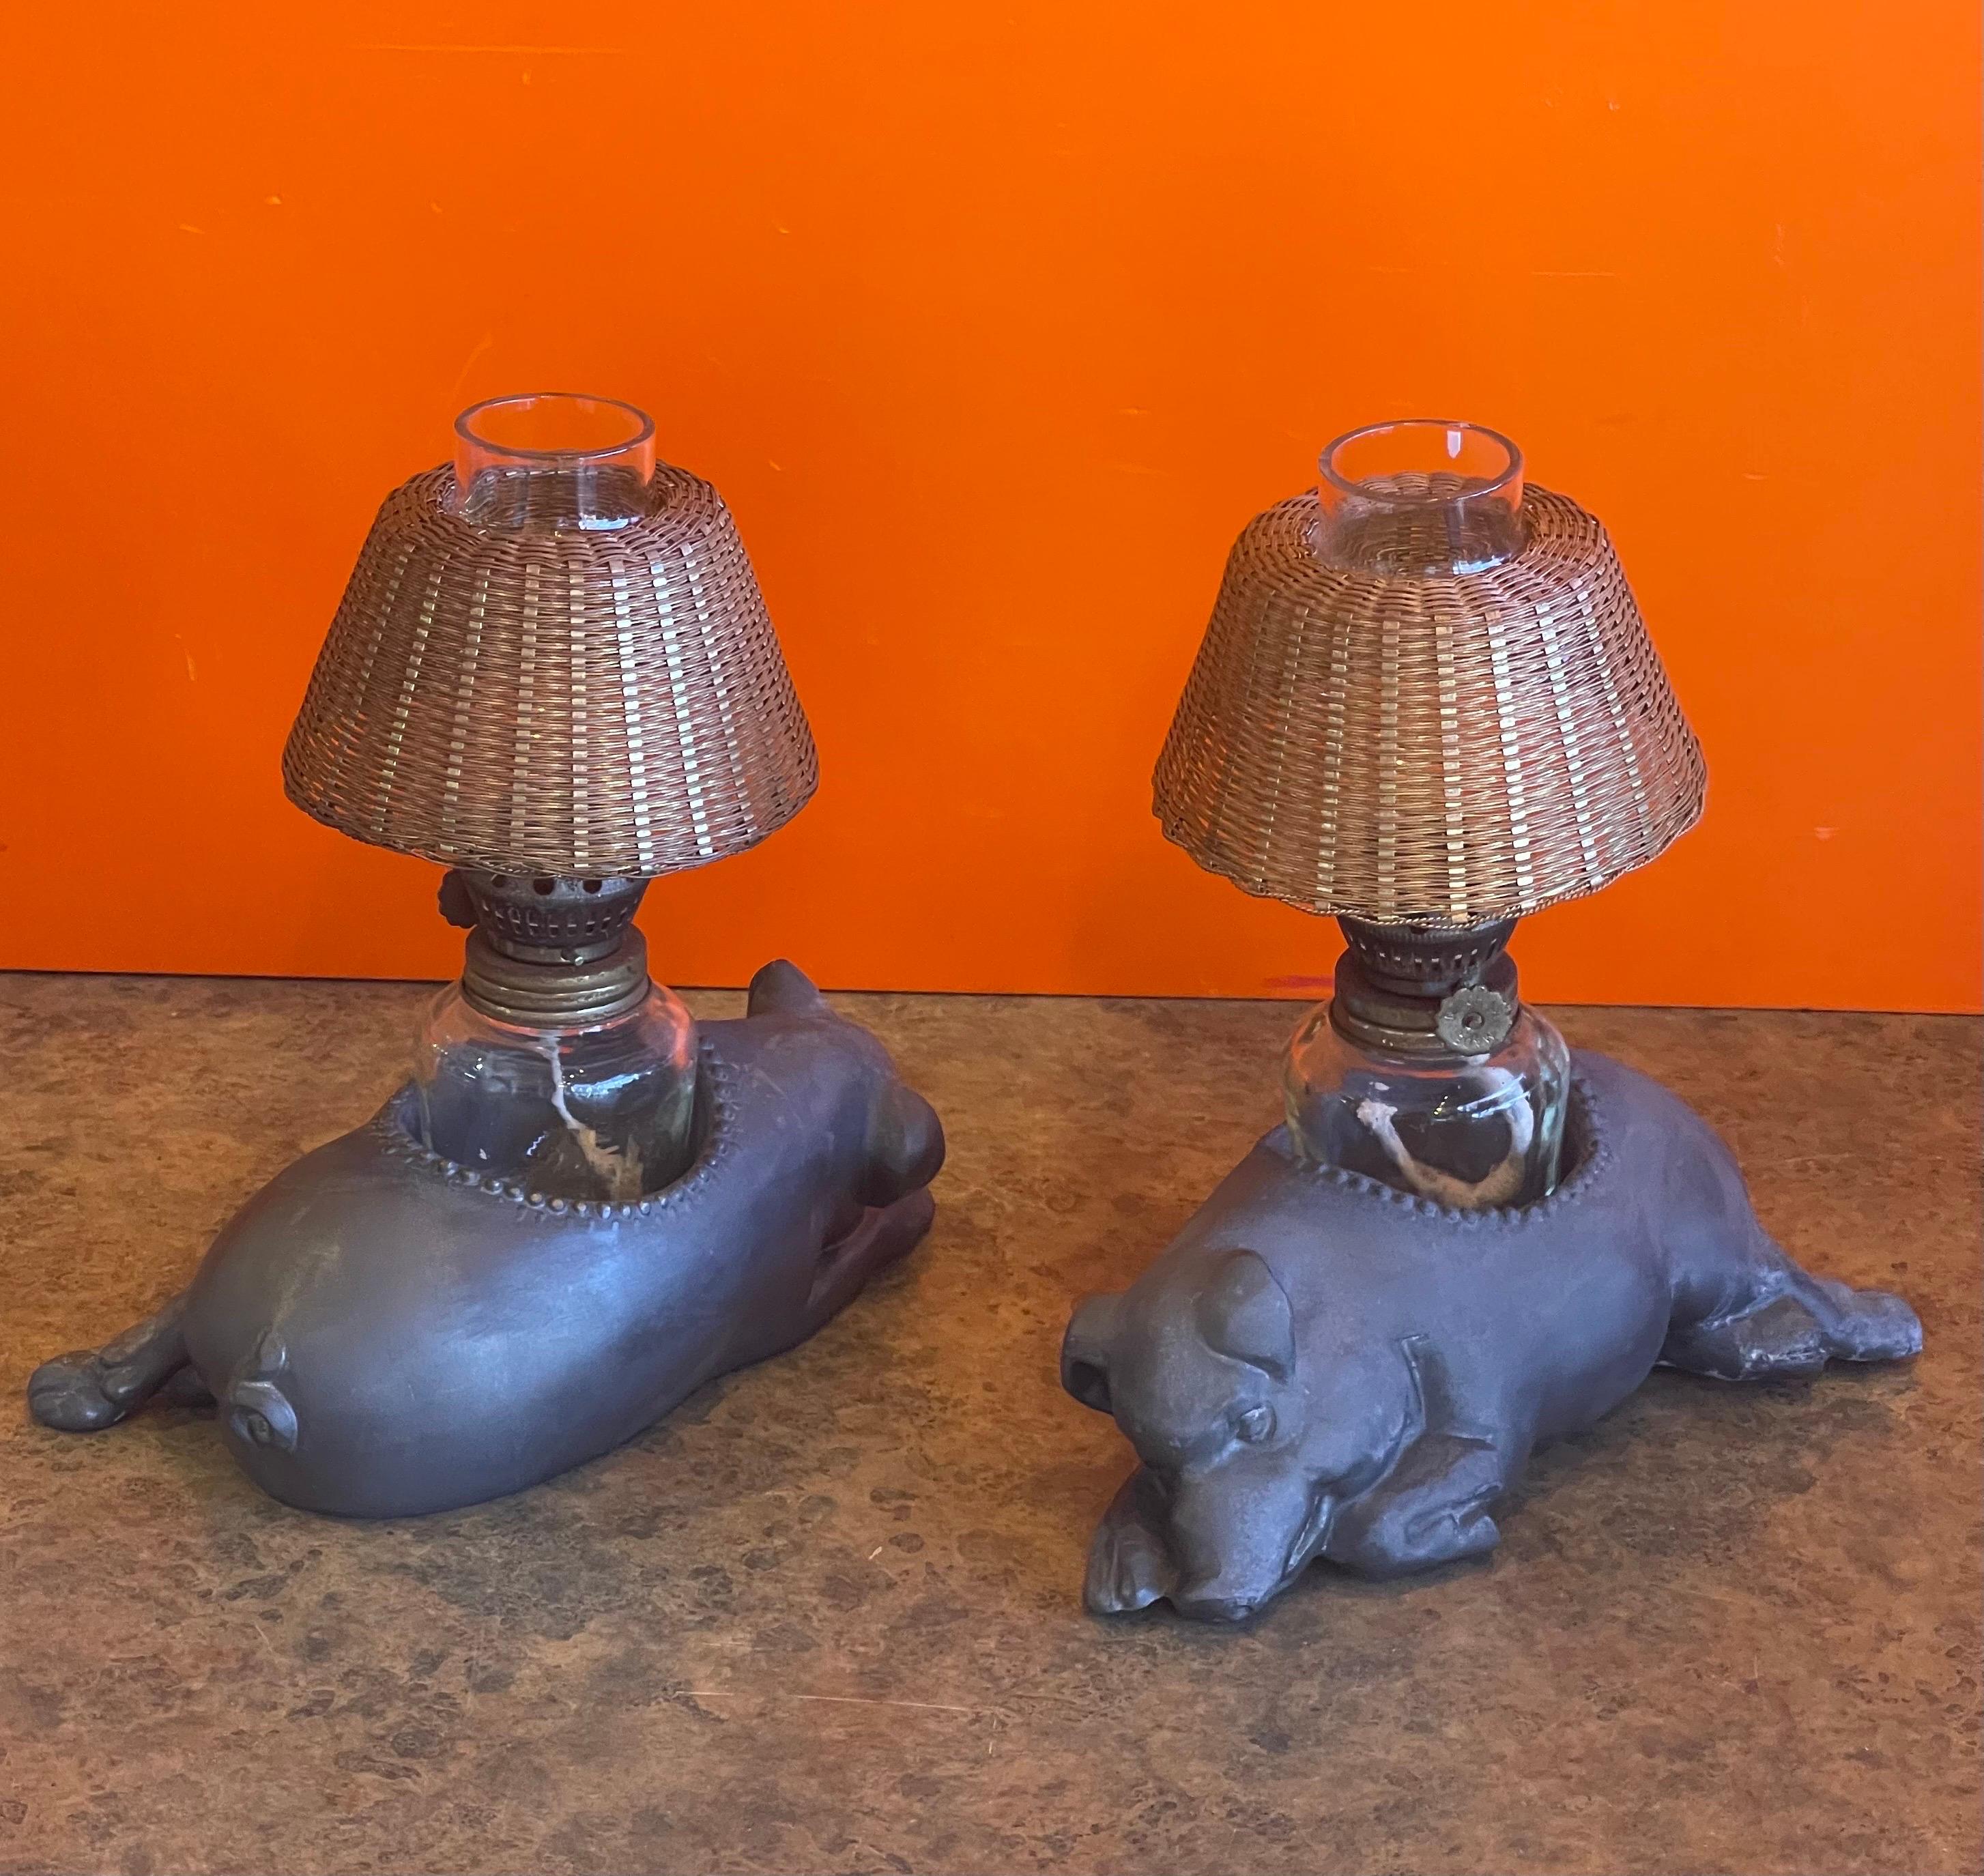 A very fun pair of vintage Morton's Steakhouse sleeping pig pewter oil lamps, circa 1980s. The lamps have graced Morton's tables since their first steakhouse opened in Chicago in 1978. Includes: Pewter pig figure, glass oil lamp and gold wicker